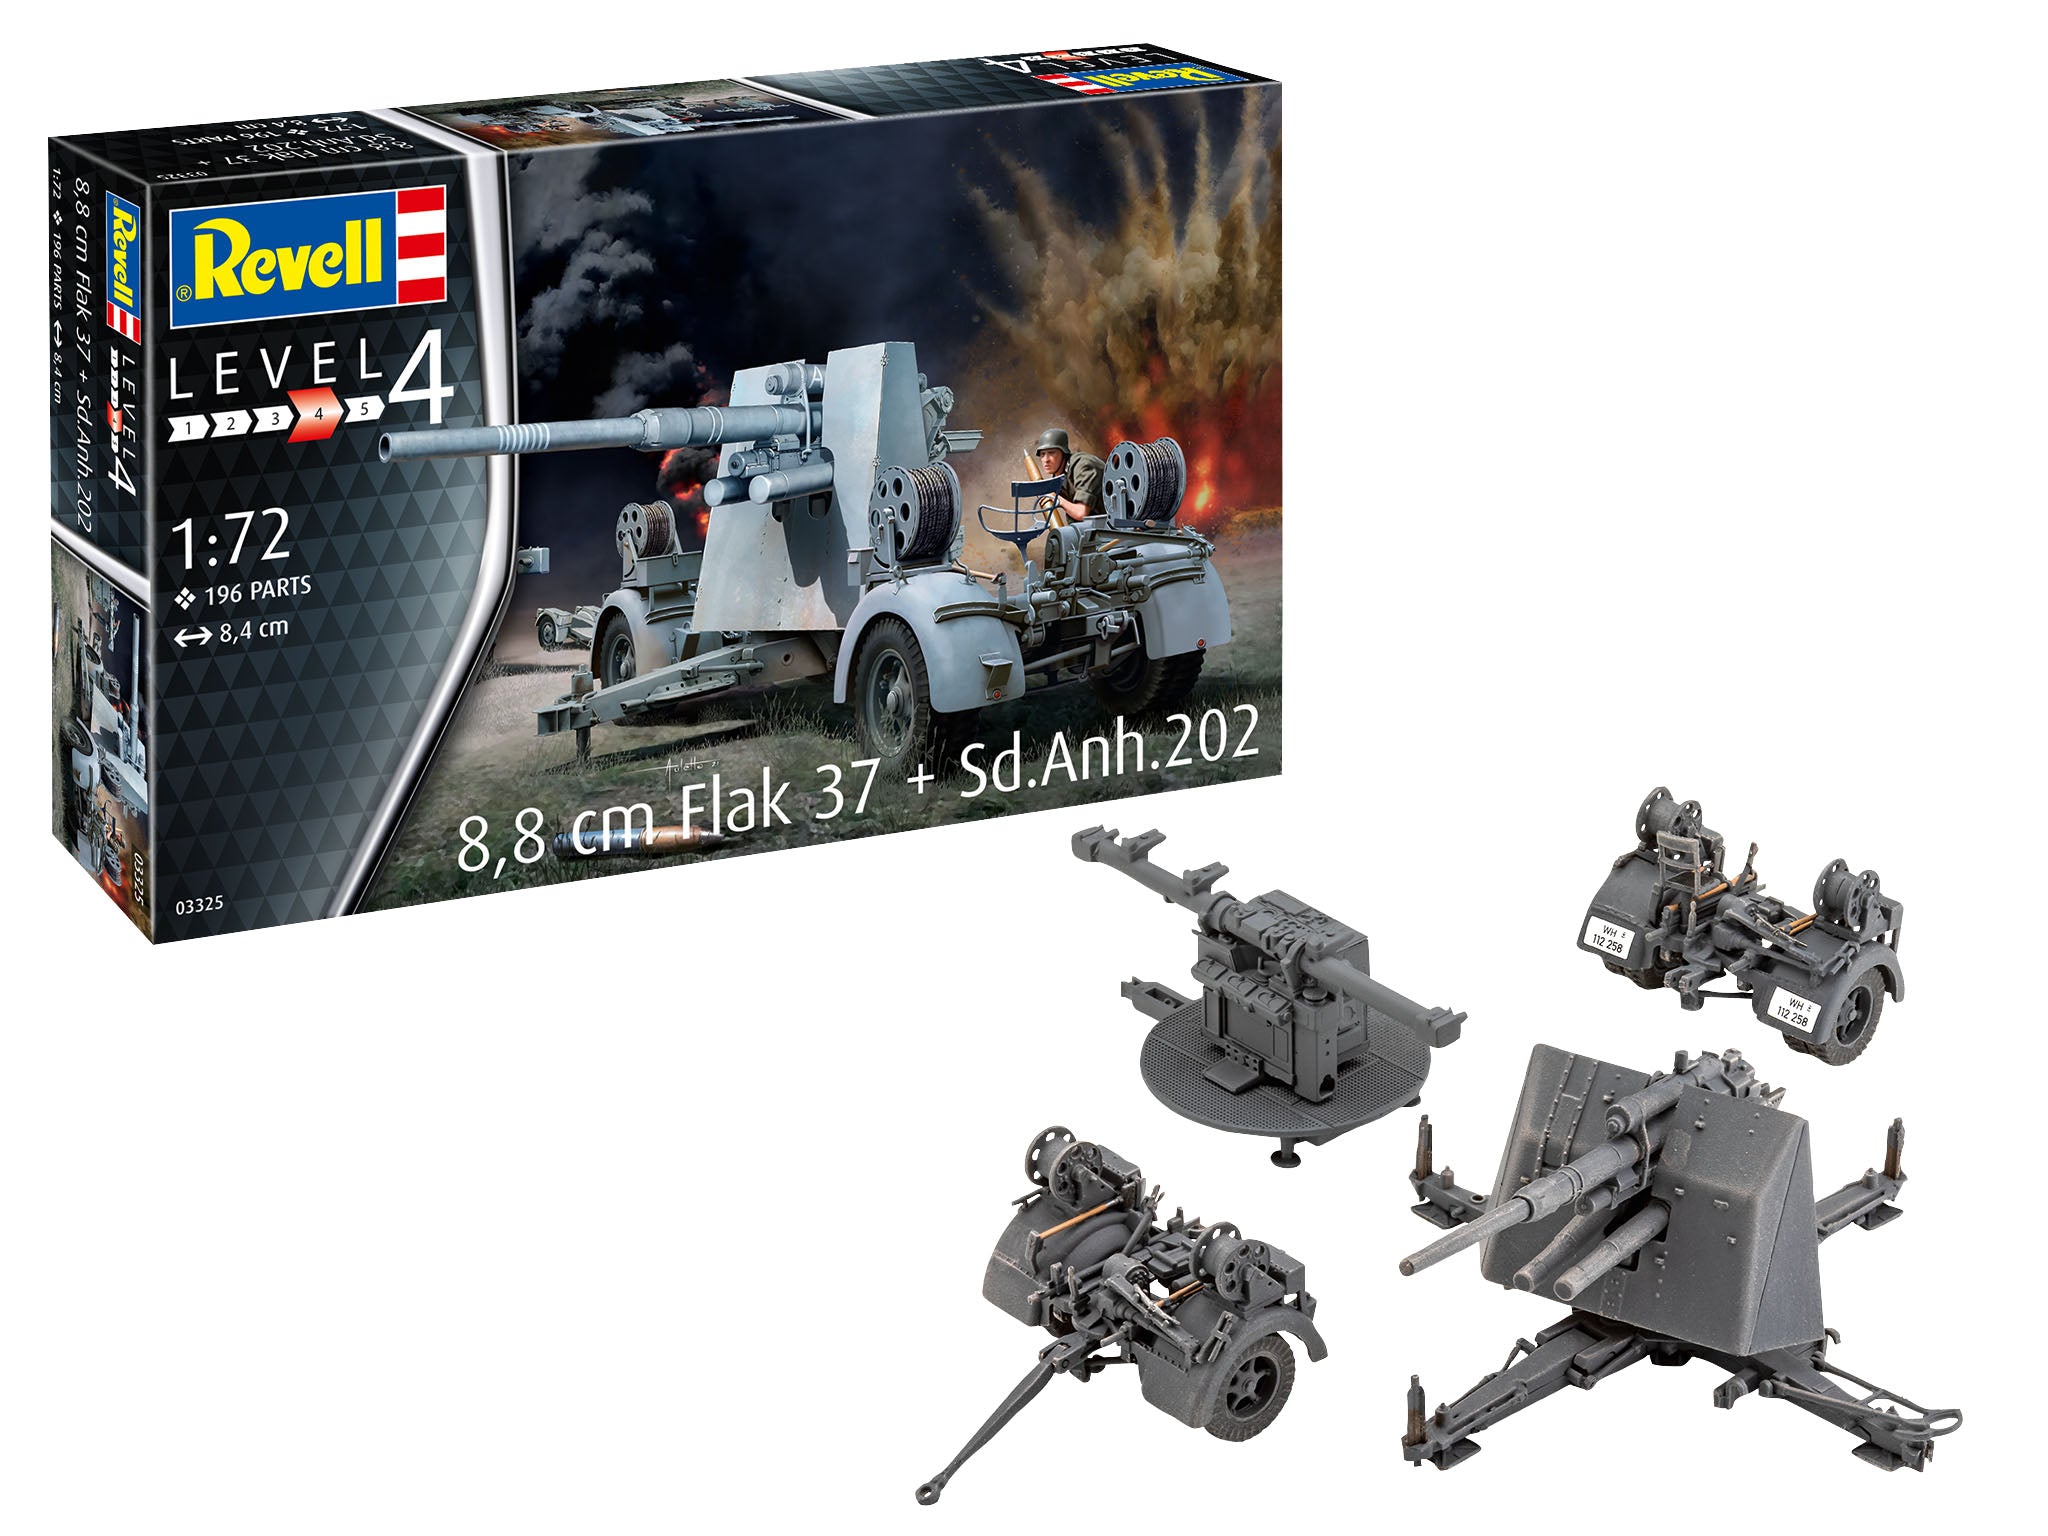 REVELL 88mm FLAK 37 + SD.ANH.202 1:72 SCALE 03325